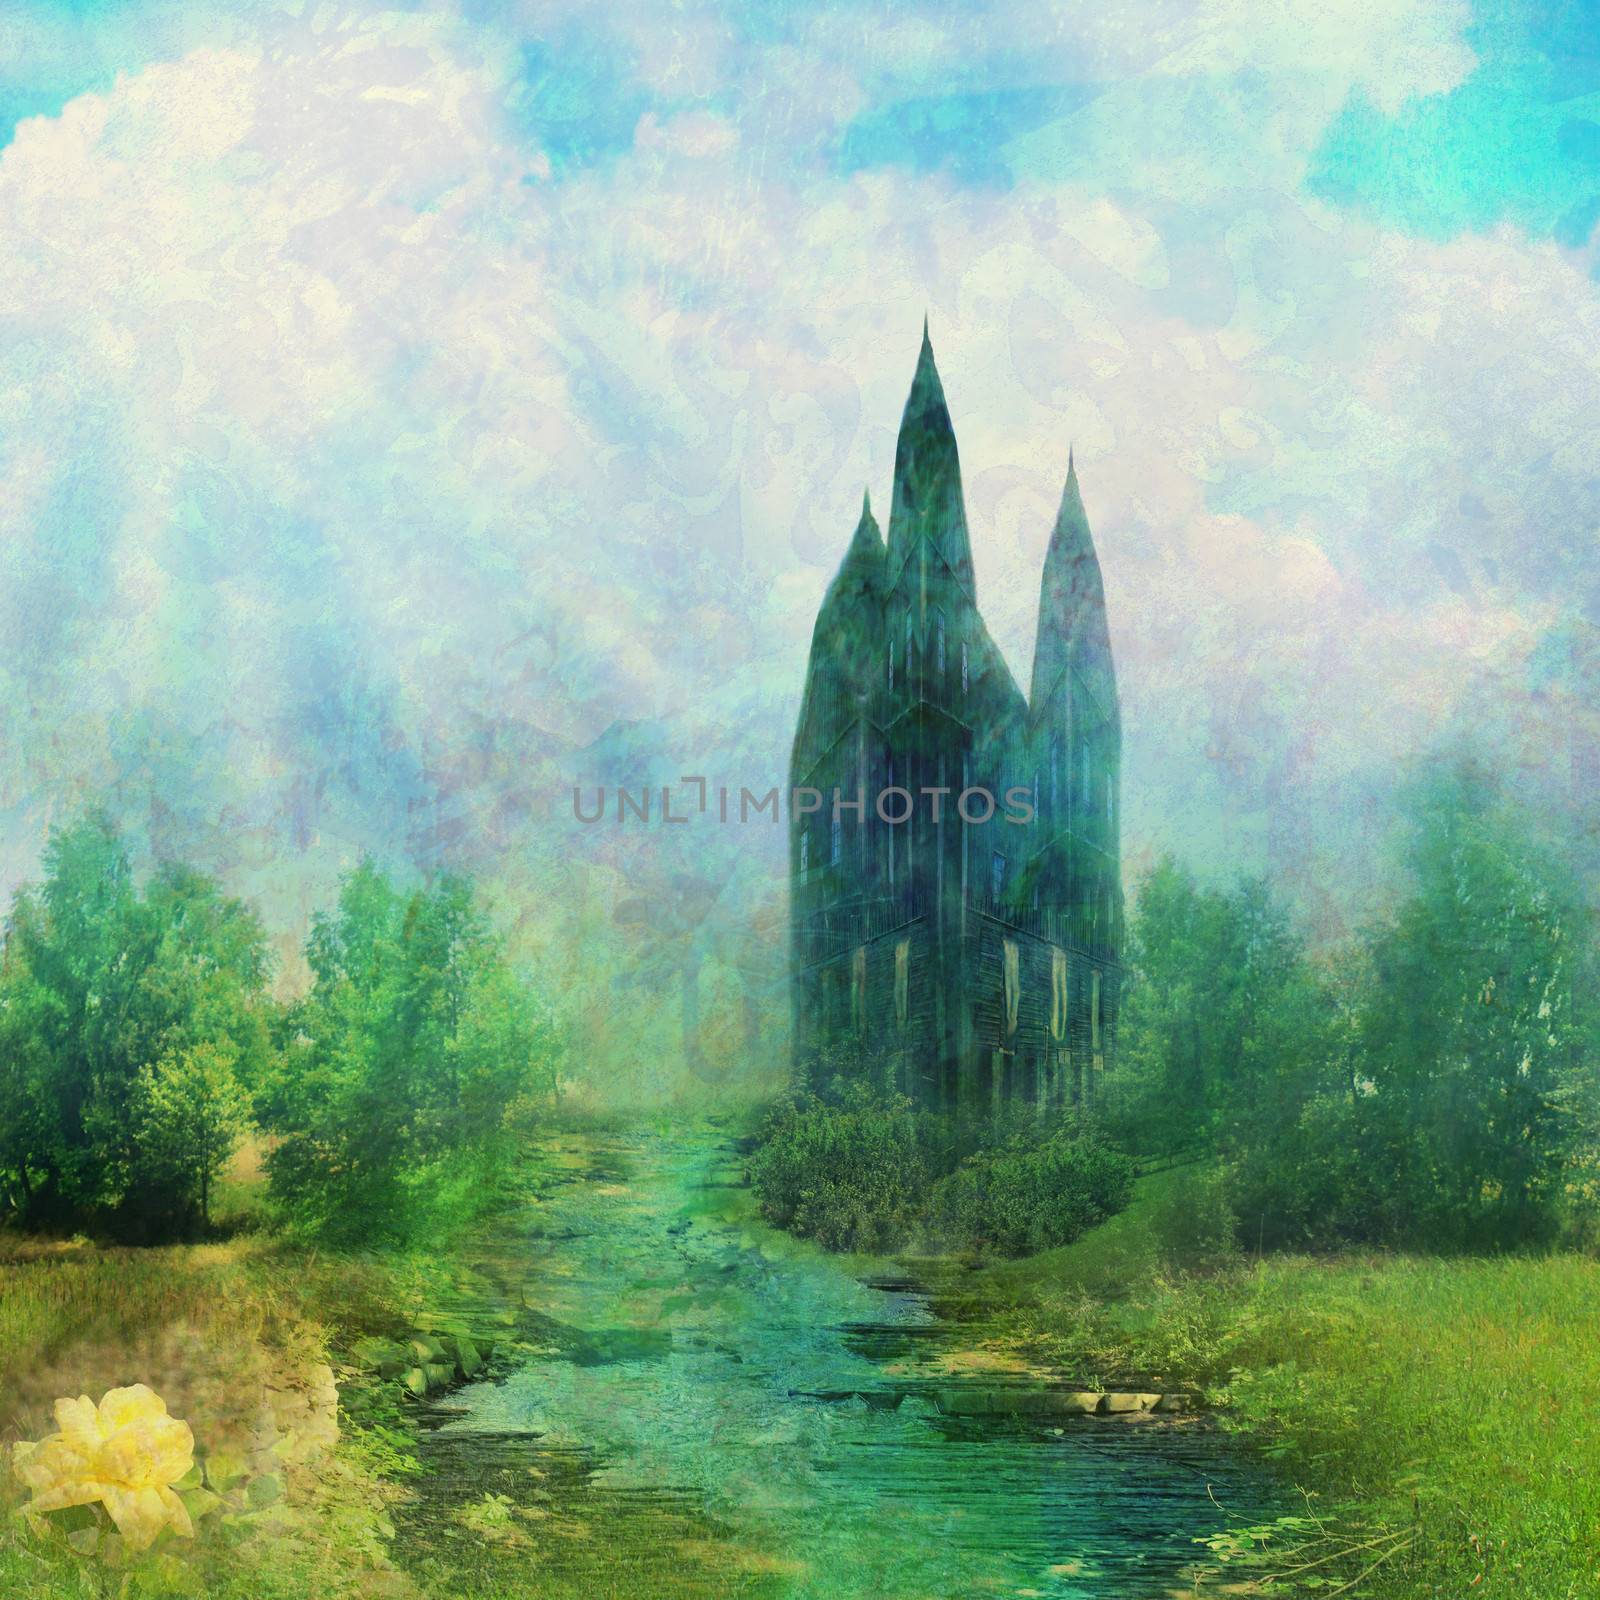 Fantasy meadow with a fairytale tower